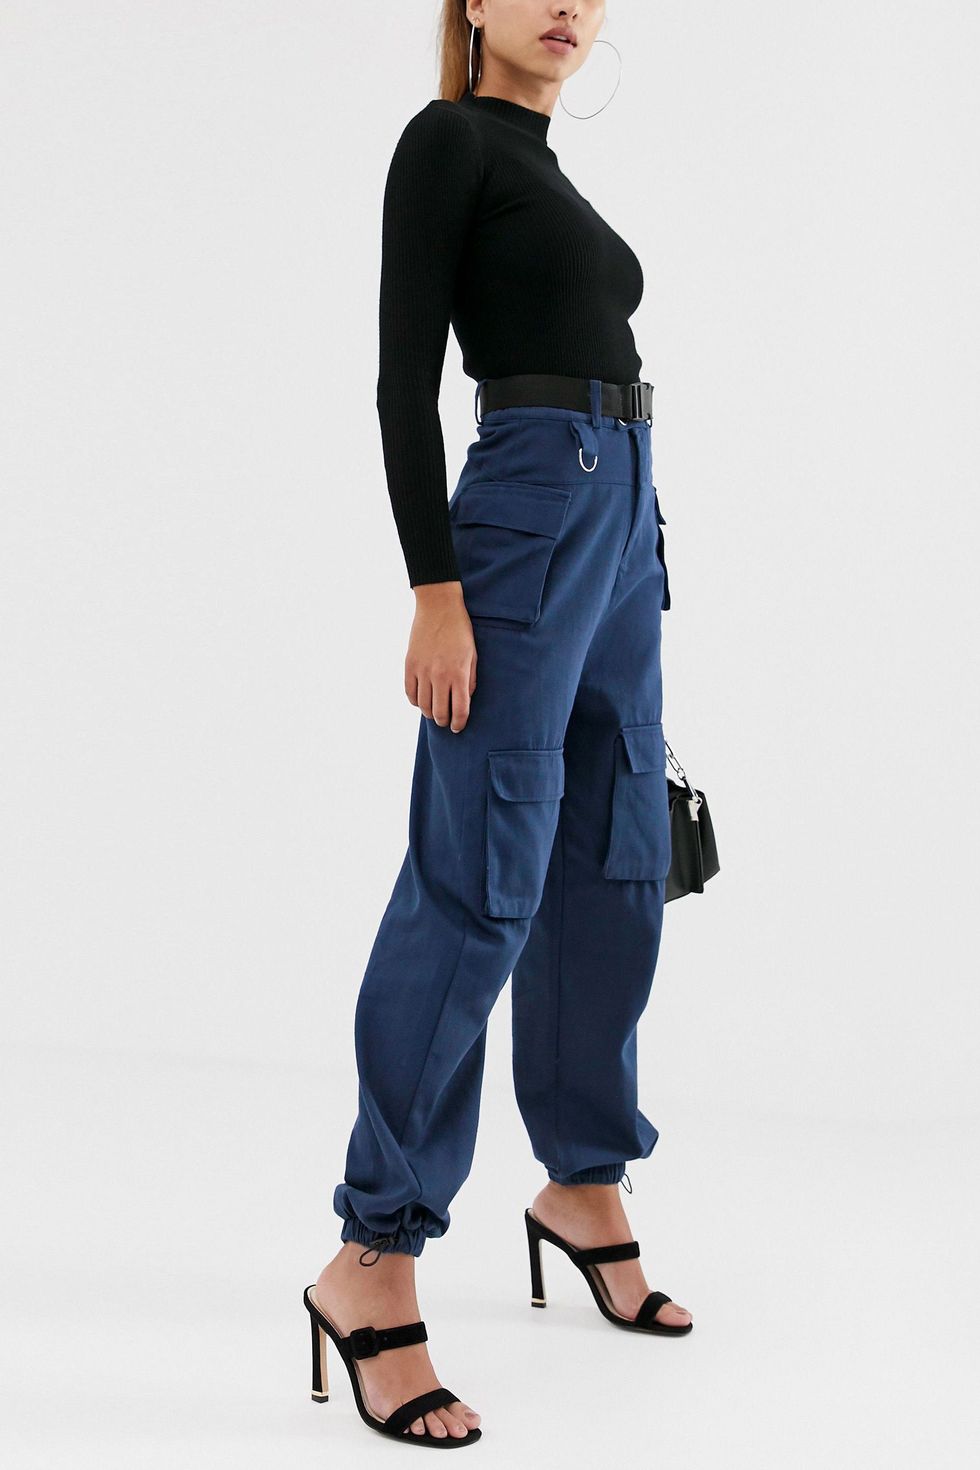 Missguided Cargo Utility Pants  